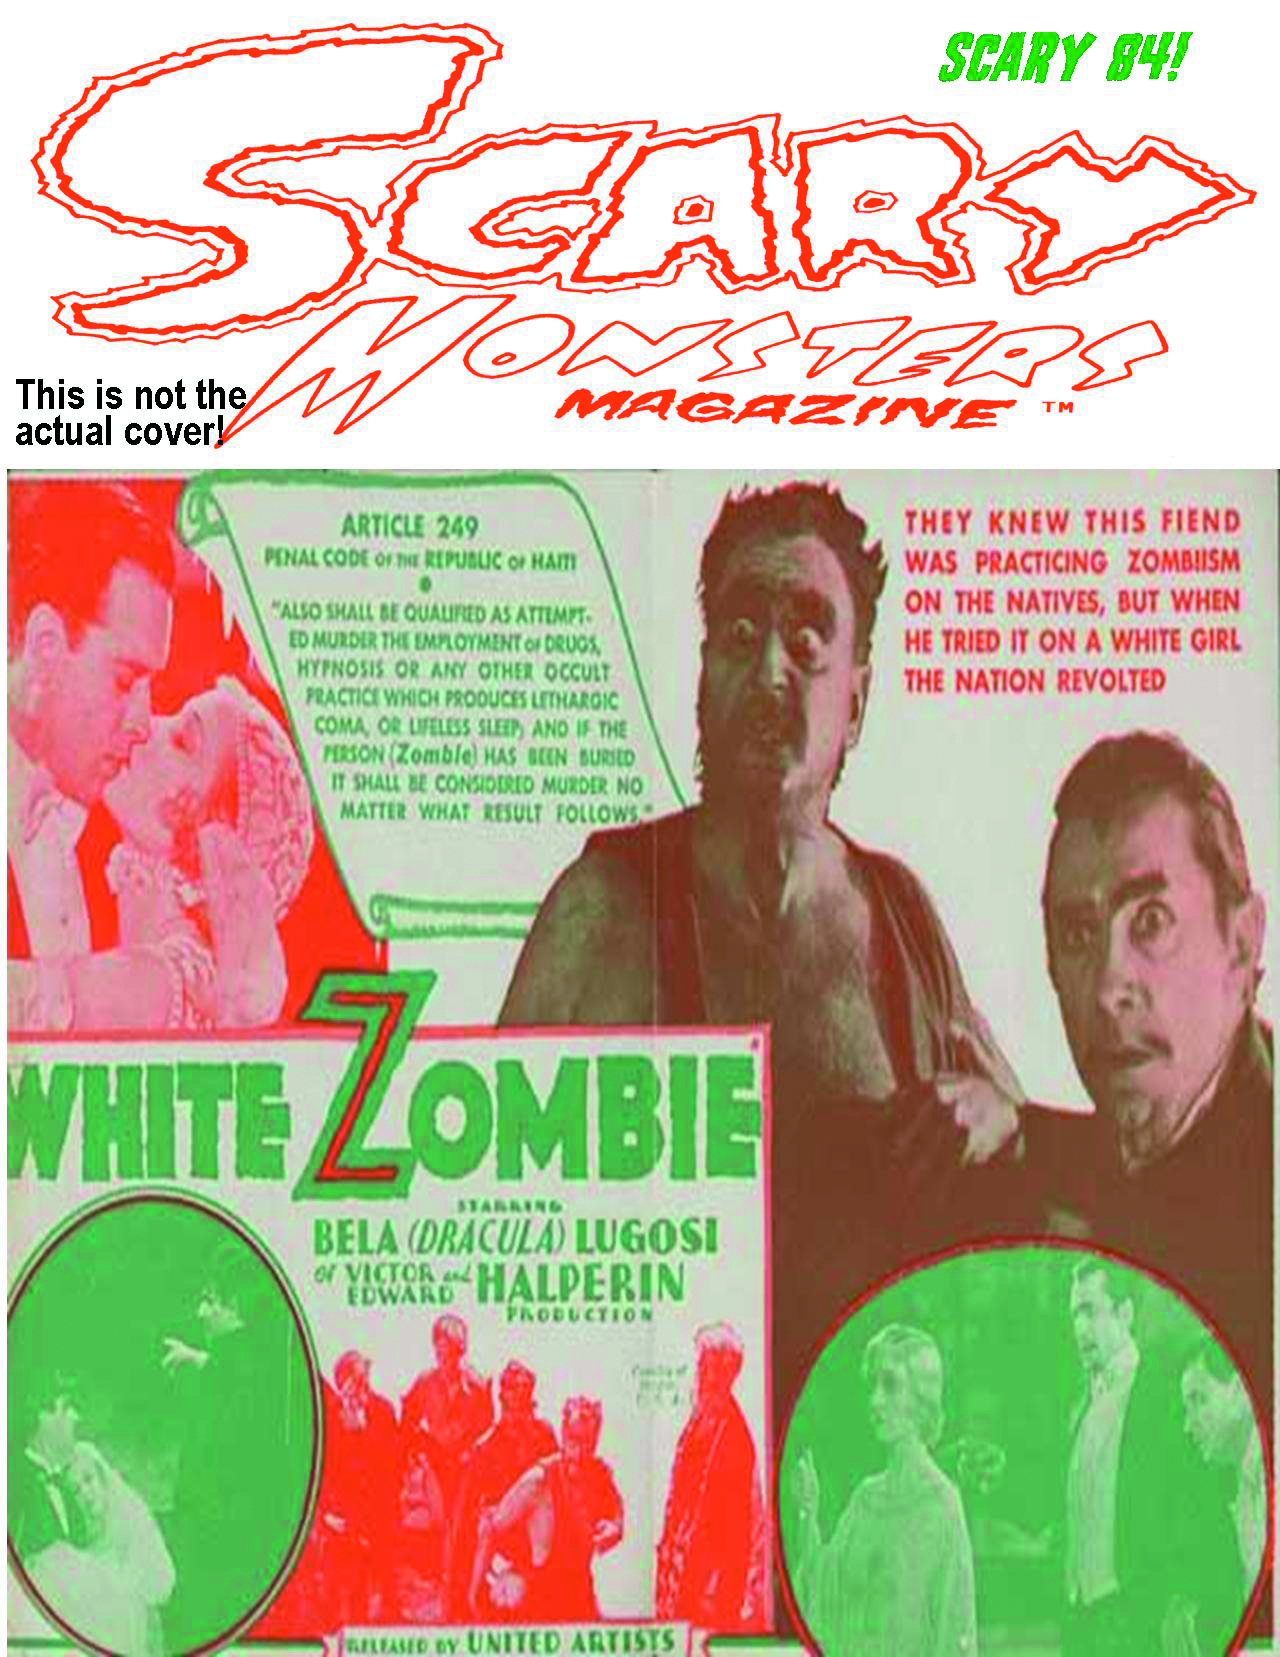 SCARY MONSTERS MAGAZINE #84